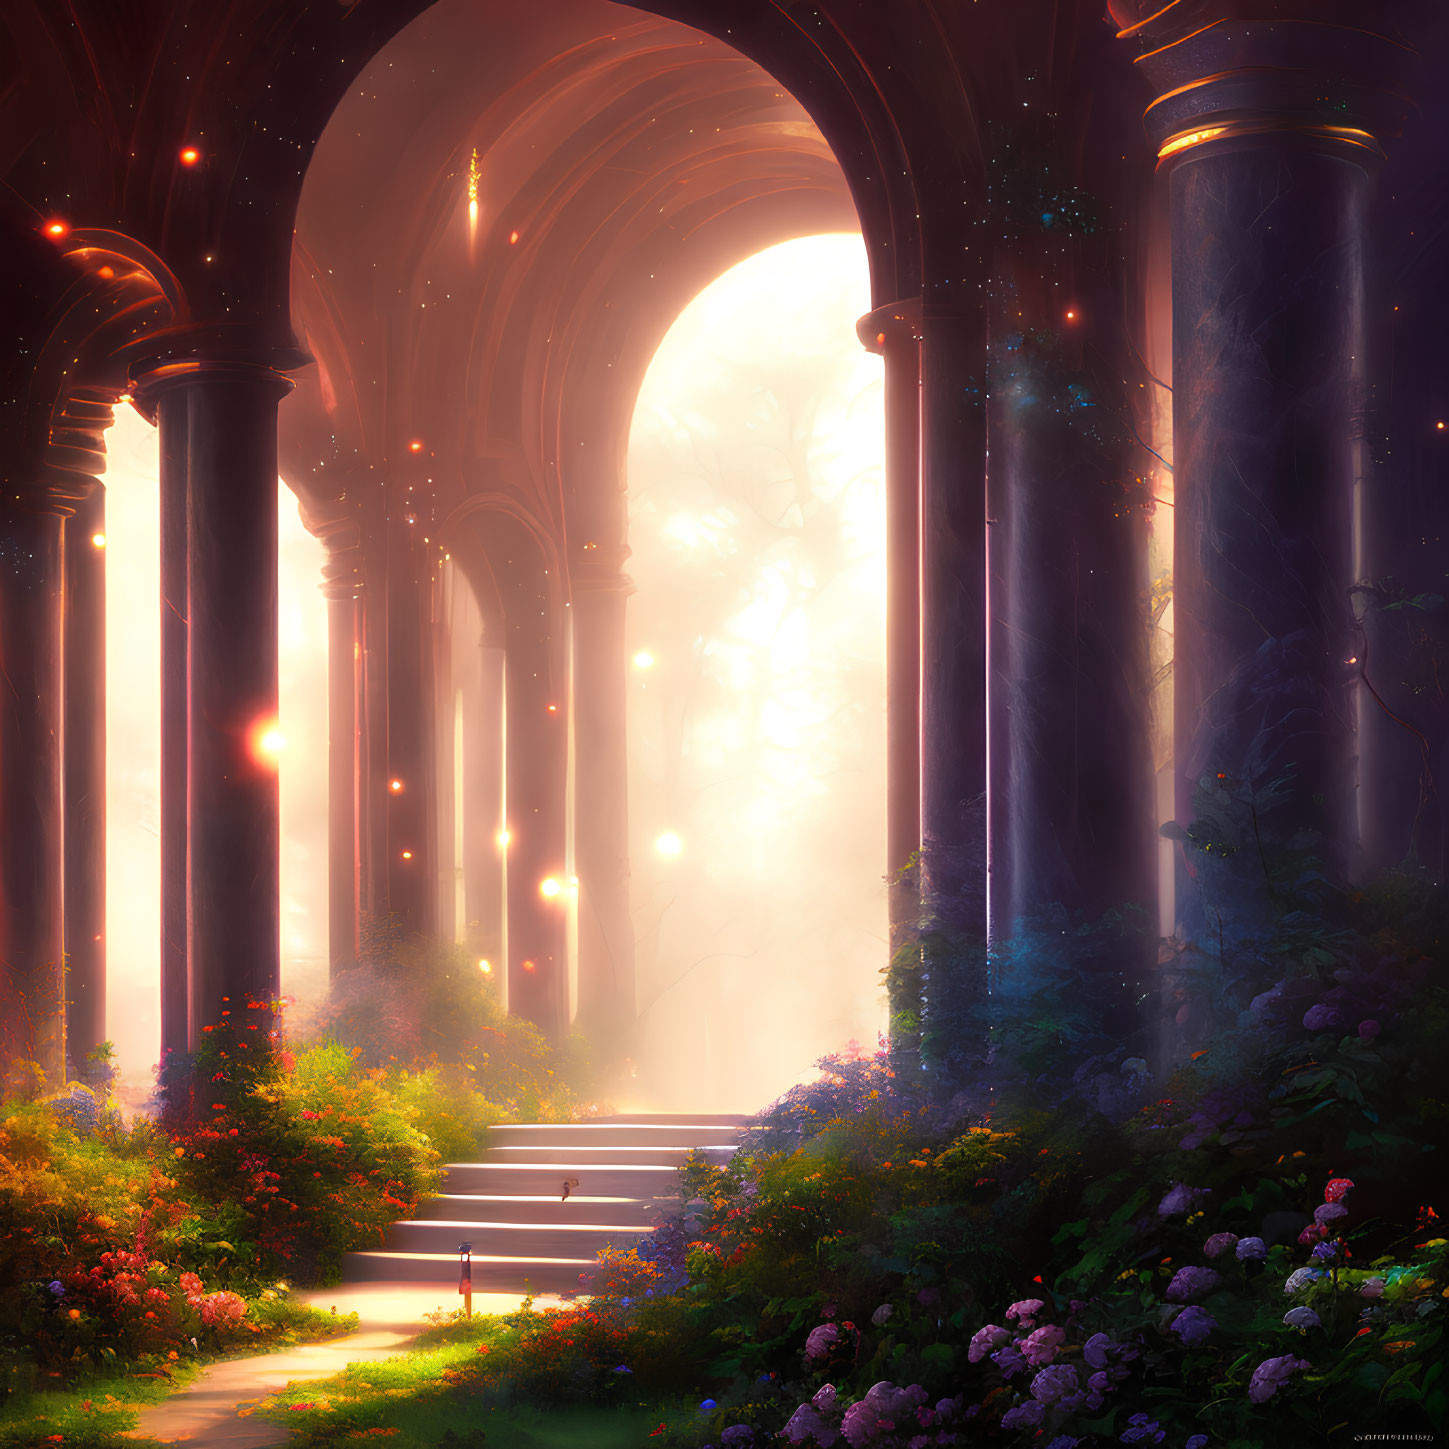 Enchanting forest with towering columns and ethereal lights